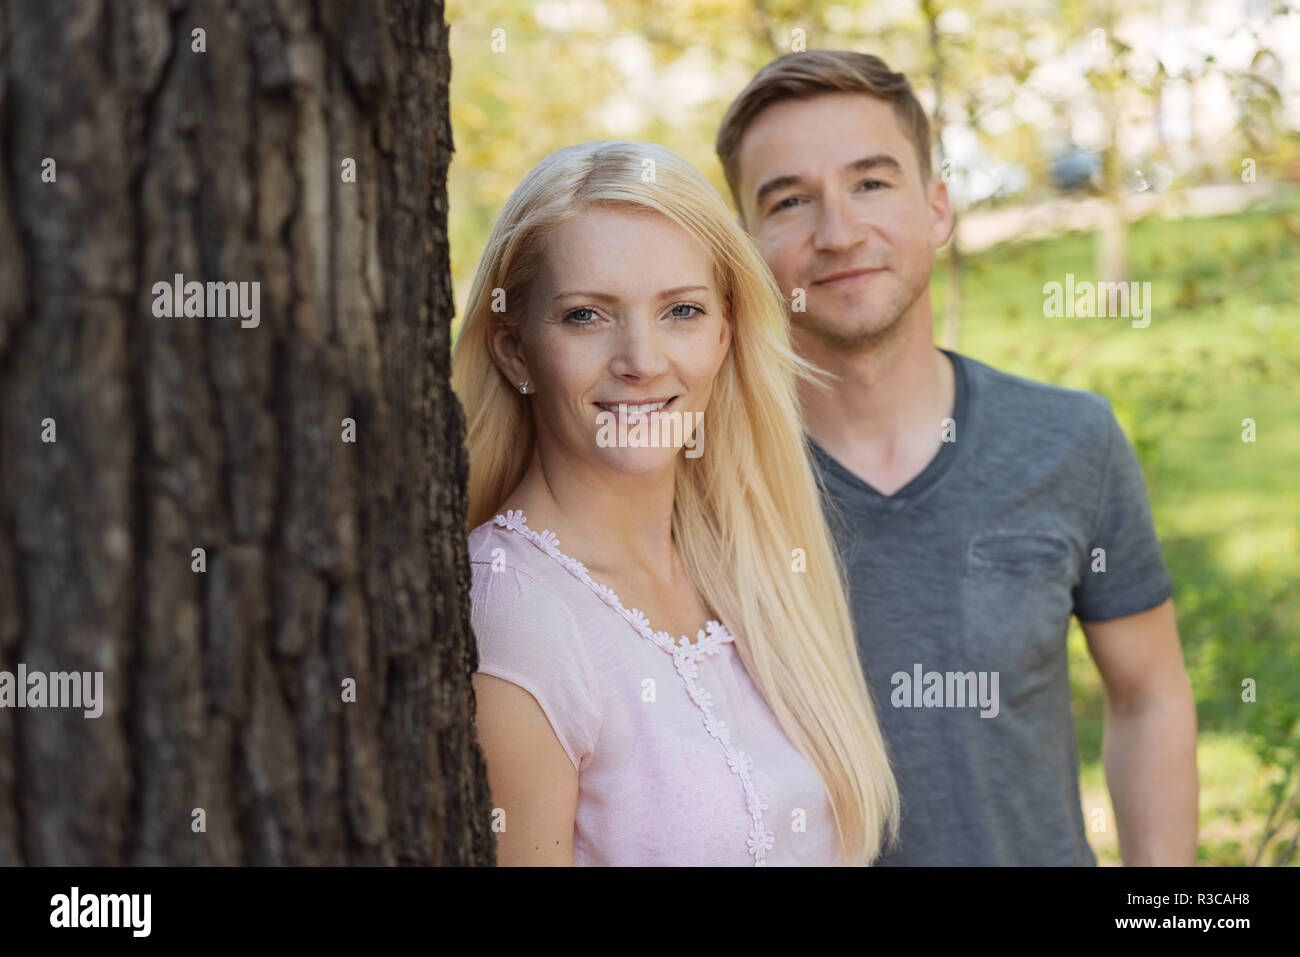 Attractive young couple outdoors in a park standing close together relaxing under a tree and smiling at the camera Stock Photo